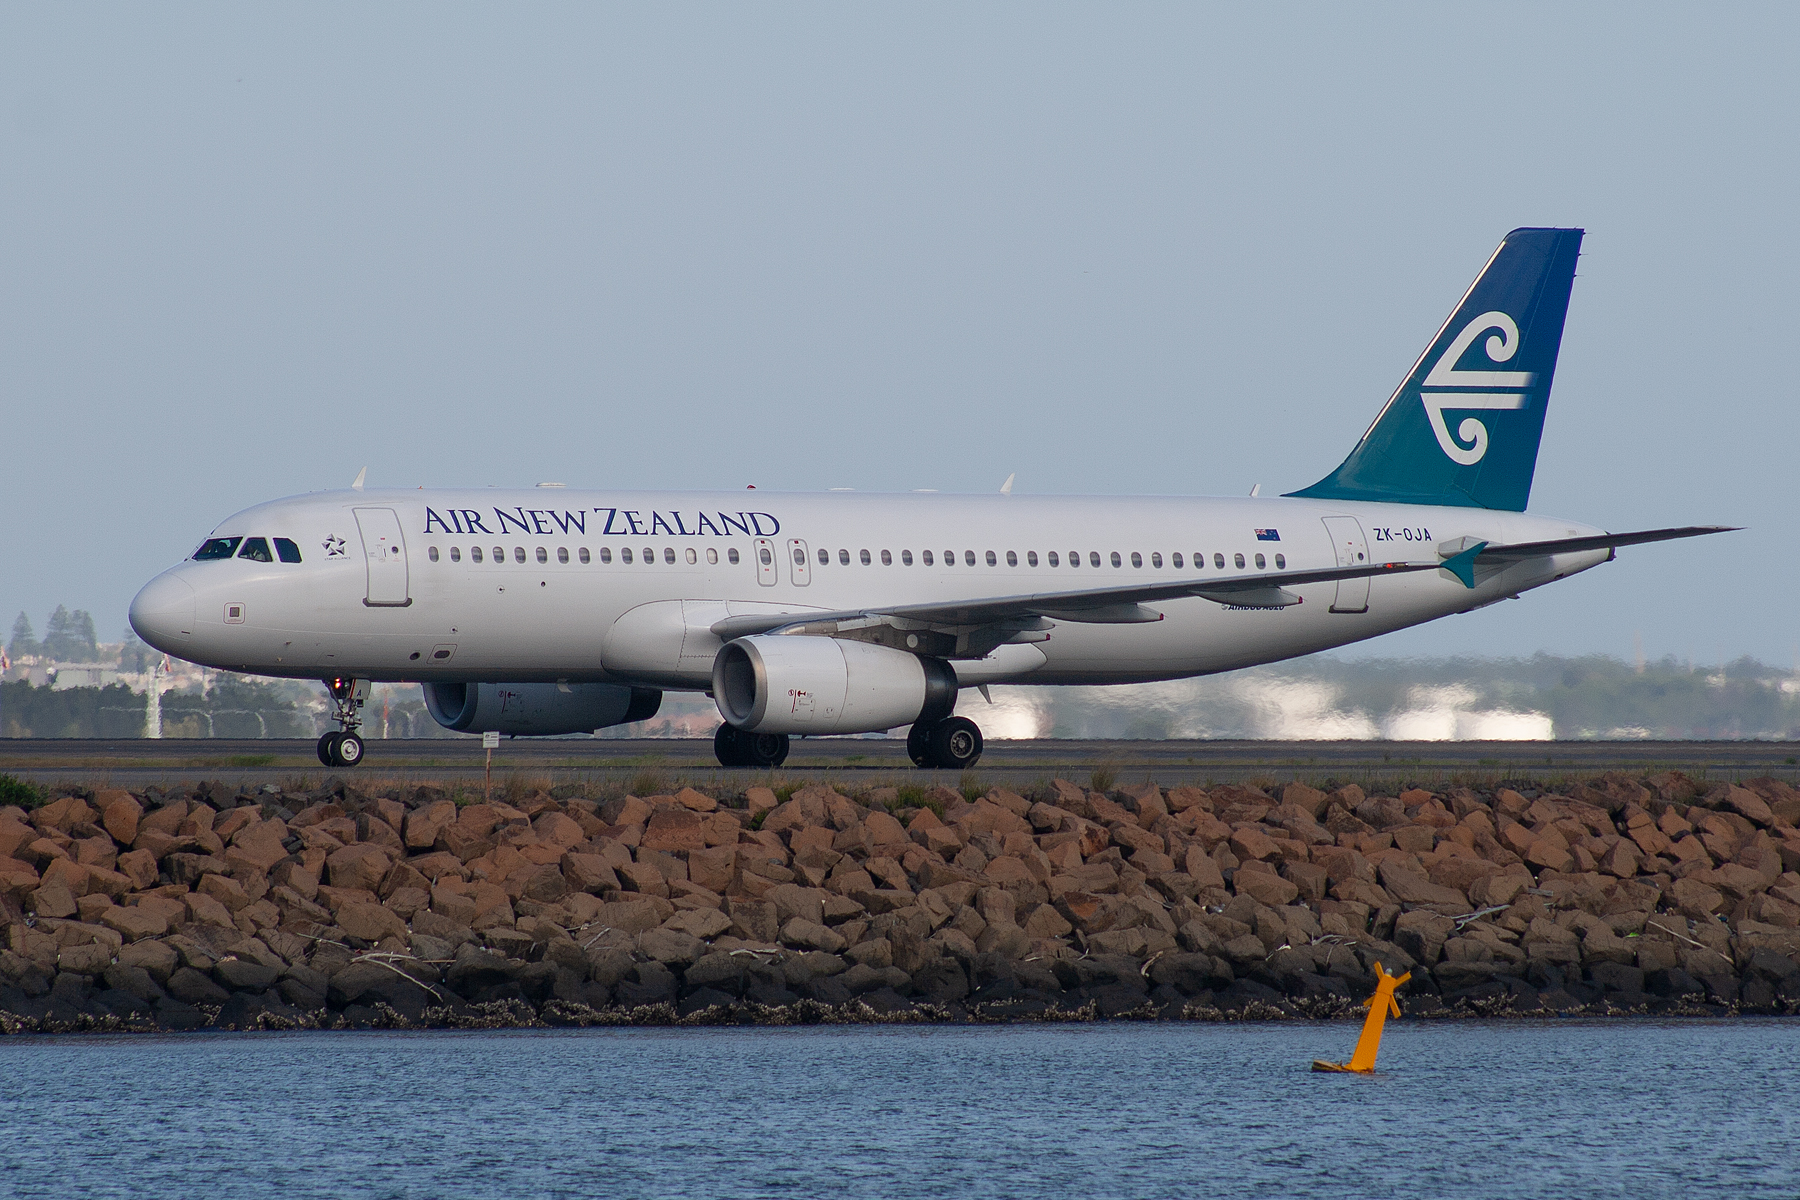 Air New Zealand Airbus A320-200 ZK-OJA at Kingsford Smith